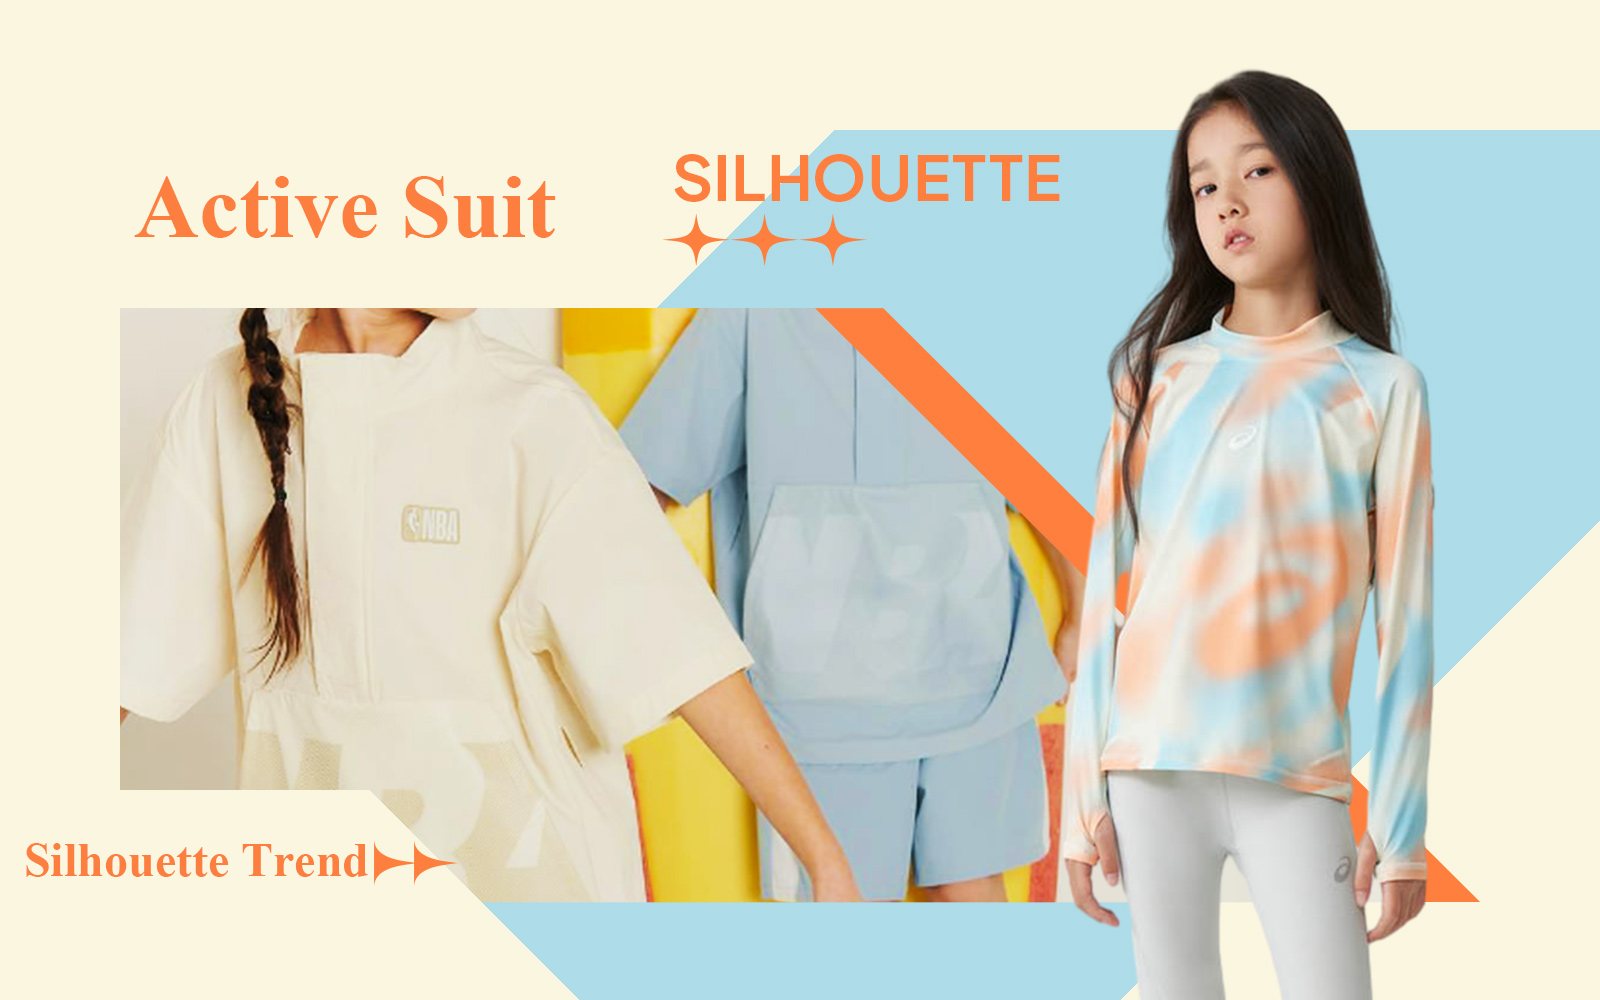 Active Suit -- The Silhouette Trend for Kidswear